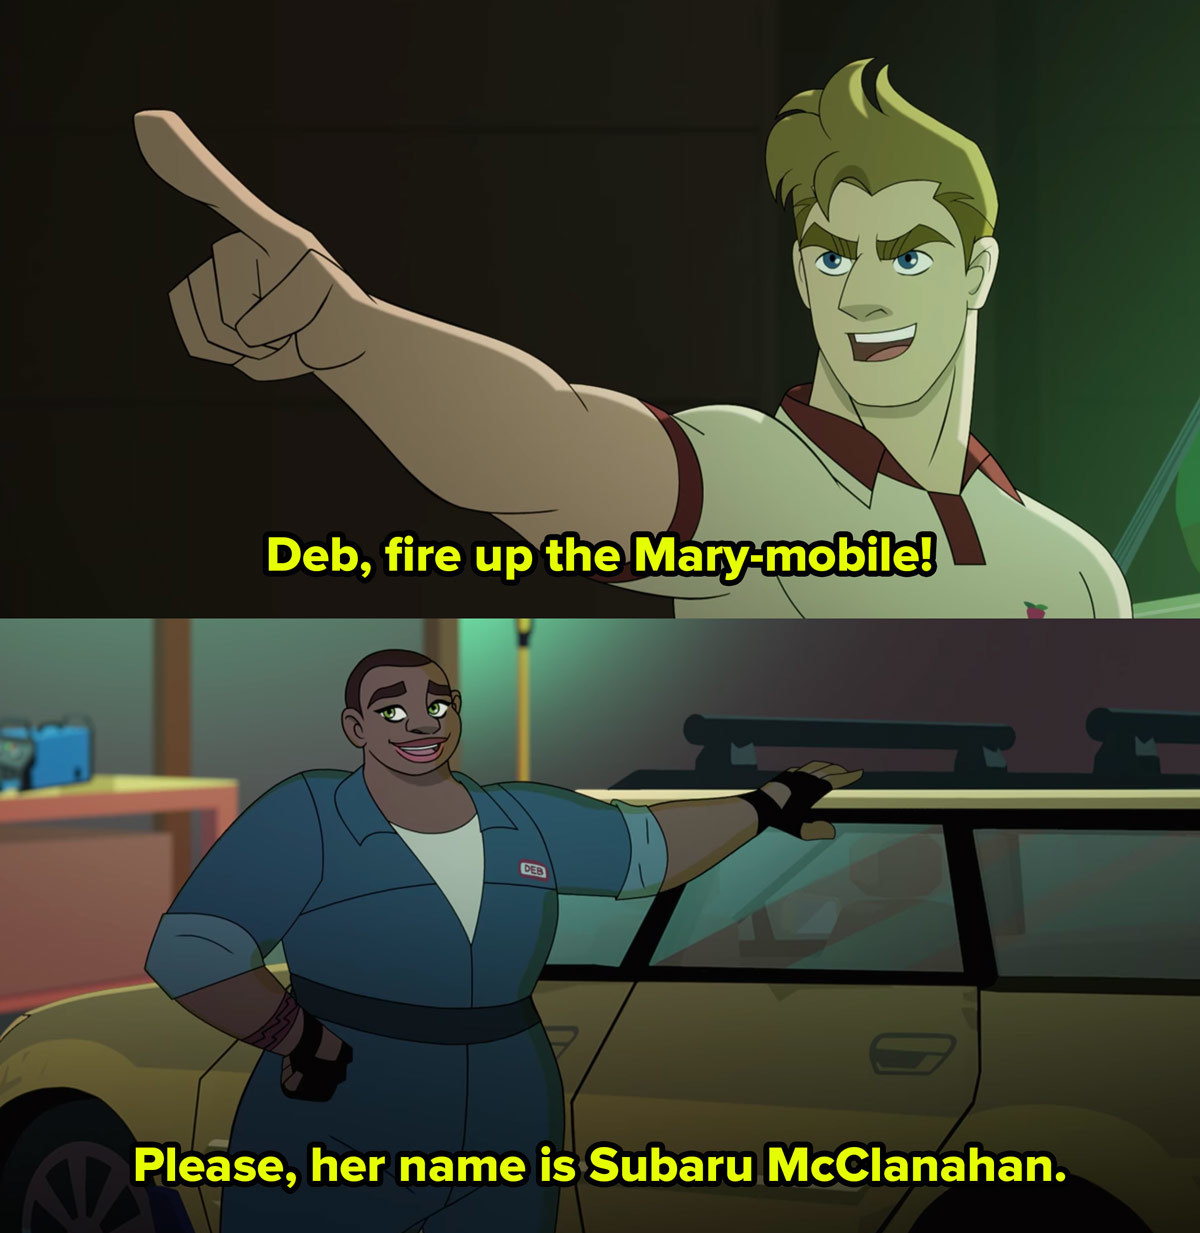 A cartoon man points and a woman stands beside a car the captions read Deb, fire up the Mary-mobile and the woman replies please, her name is Subaru McClanahan